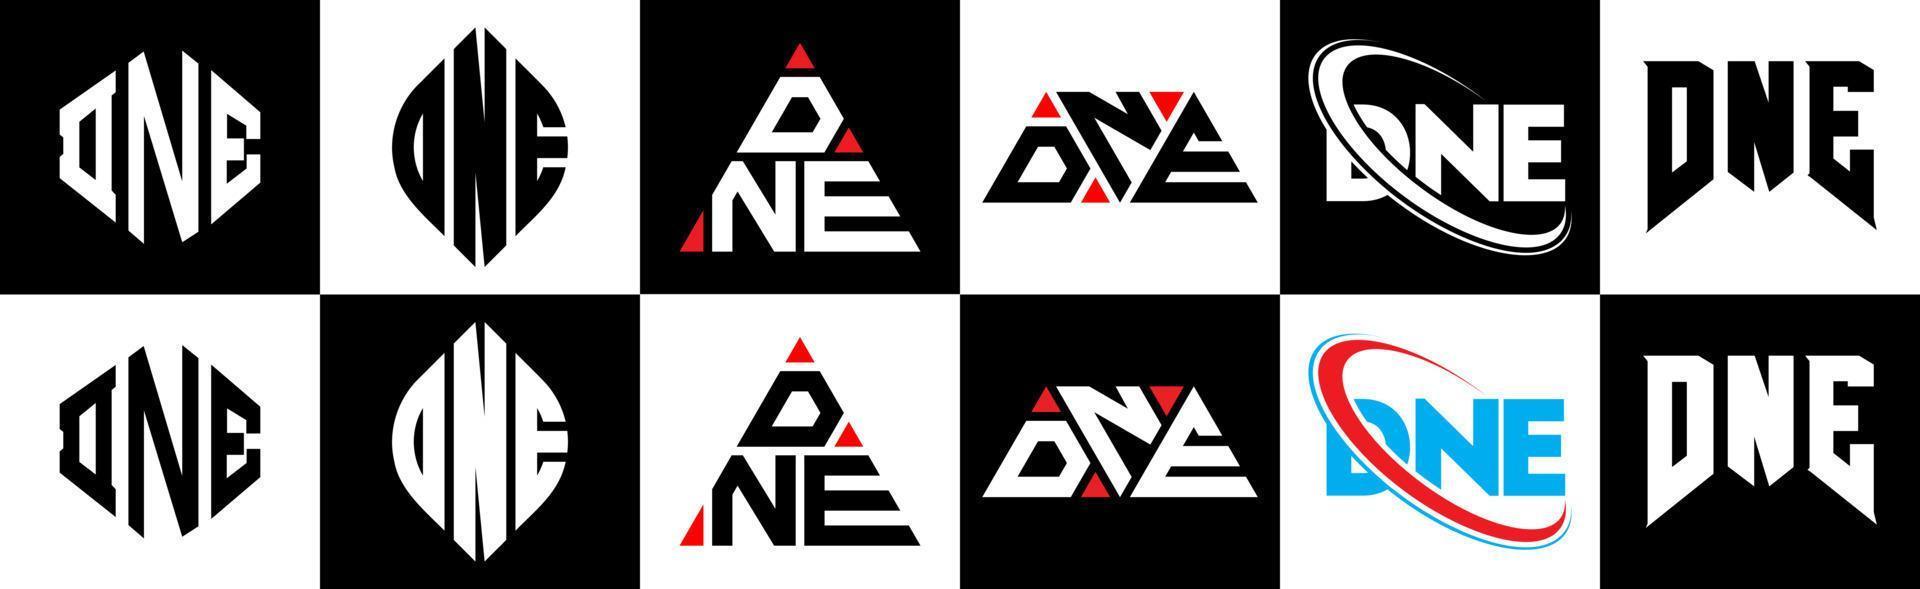 DNE letter logo design in six style. DNE polygon, circle, triangle, hexagon, flat and simple style with black and white color variation letter logo set in one artboard. DNE minimalist and classic logo vector